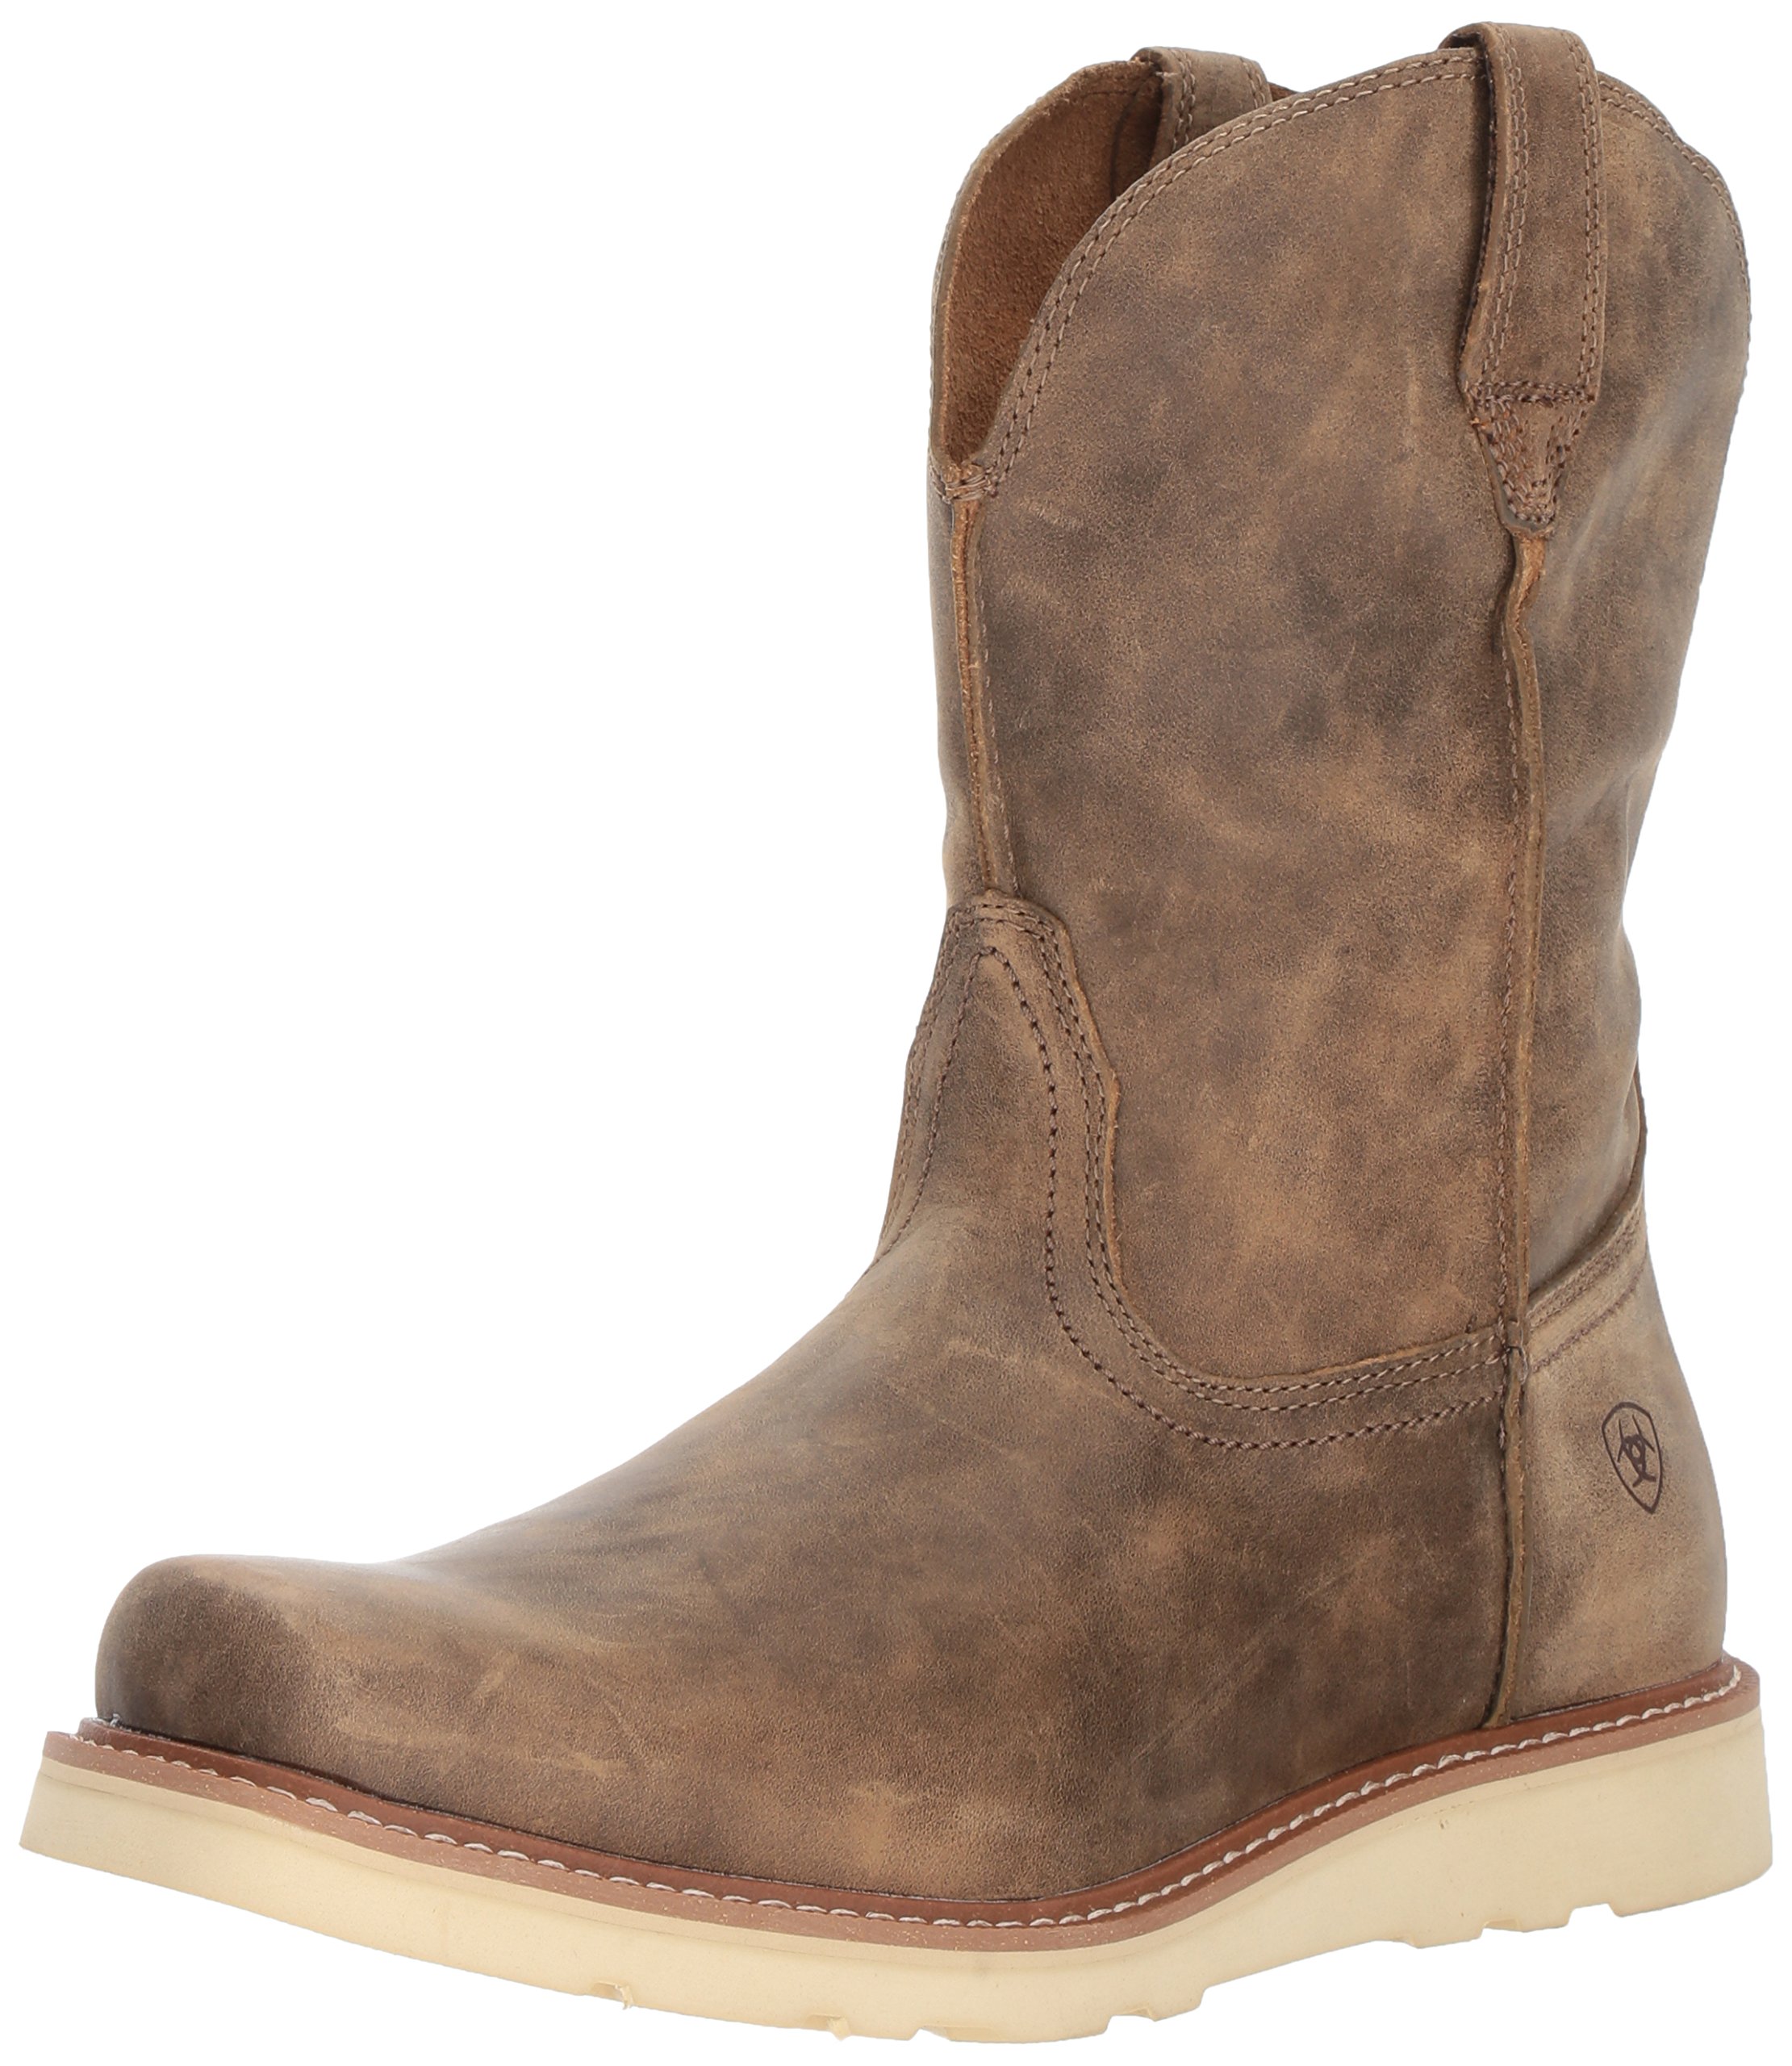 Ariat Rambler Recon Western Boots - Men’s Square Toe Work Boot